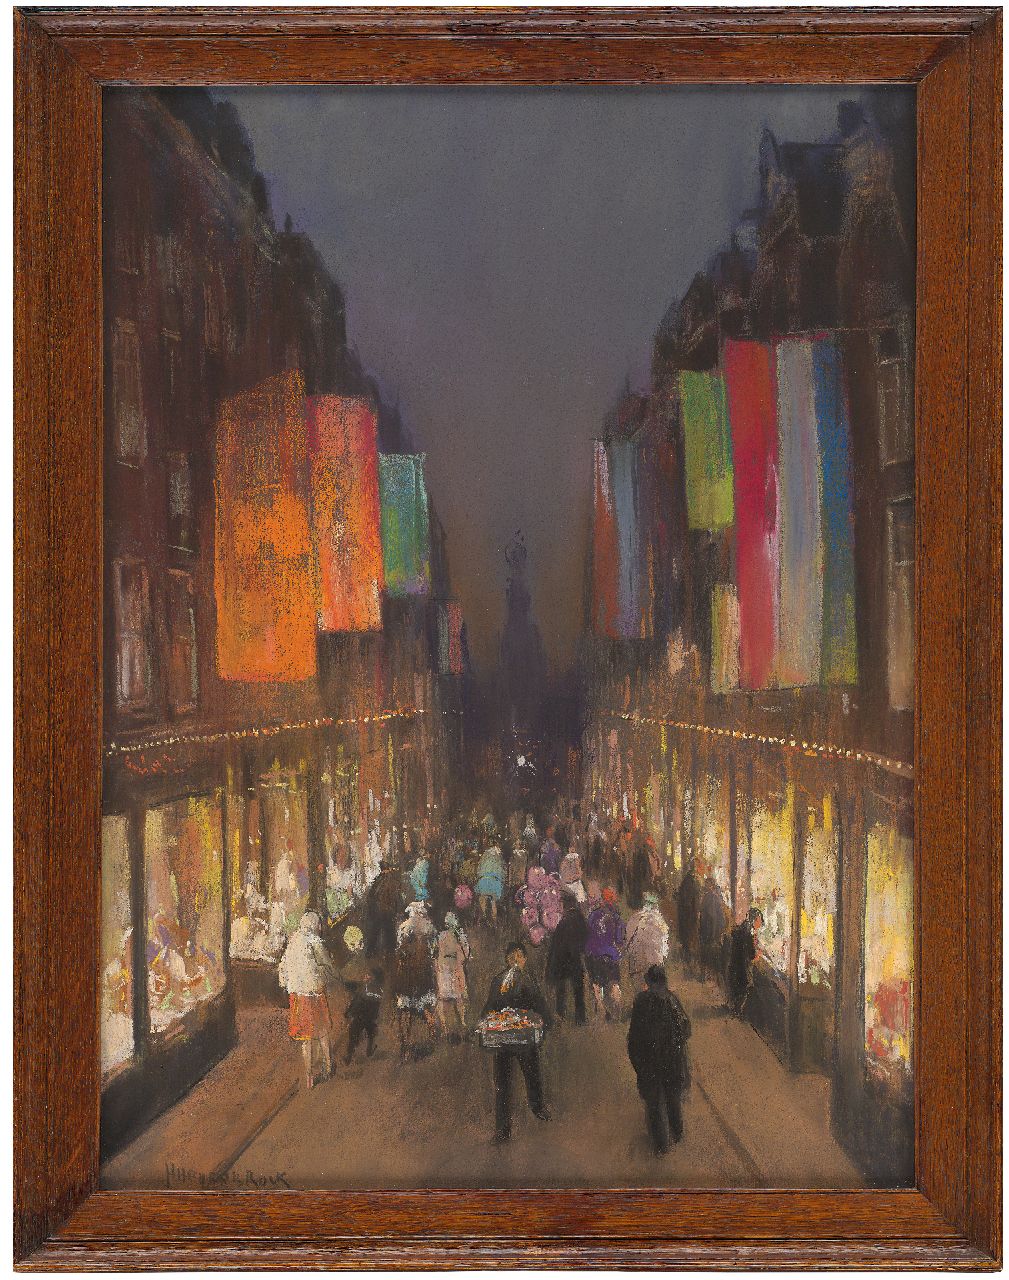 Heijenbrock J.C.H.  | Johan Coenraad Hermann 'Herman' Heijenbrock | Watercolours and drawings offered for sale | The Kalverstraat with flags, by night, pastel on paper 61.0 x 39.3 cm, signed l.l.